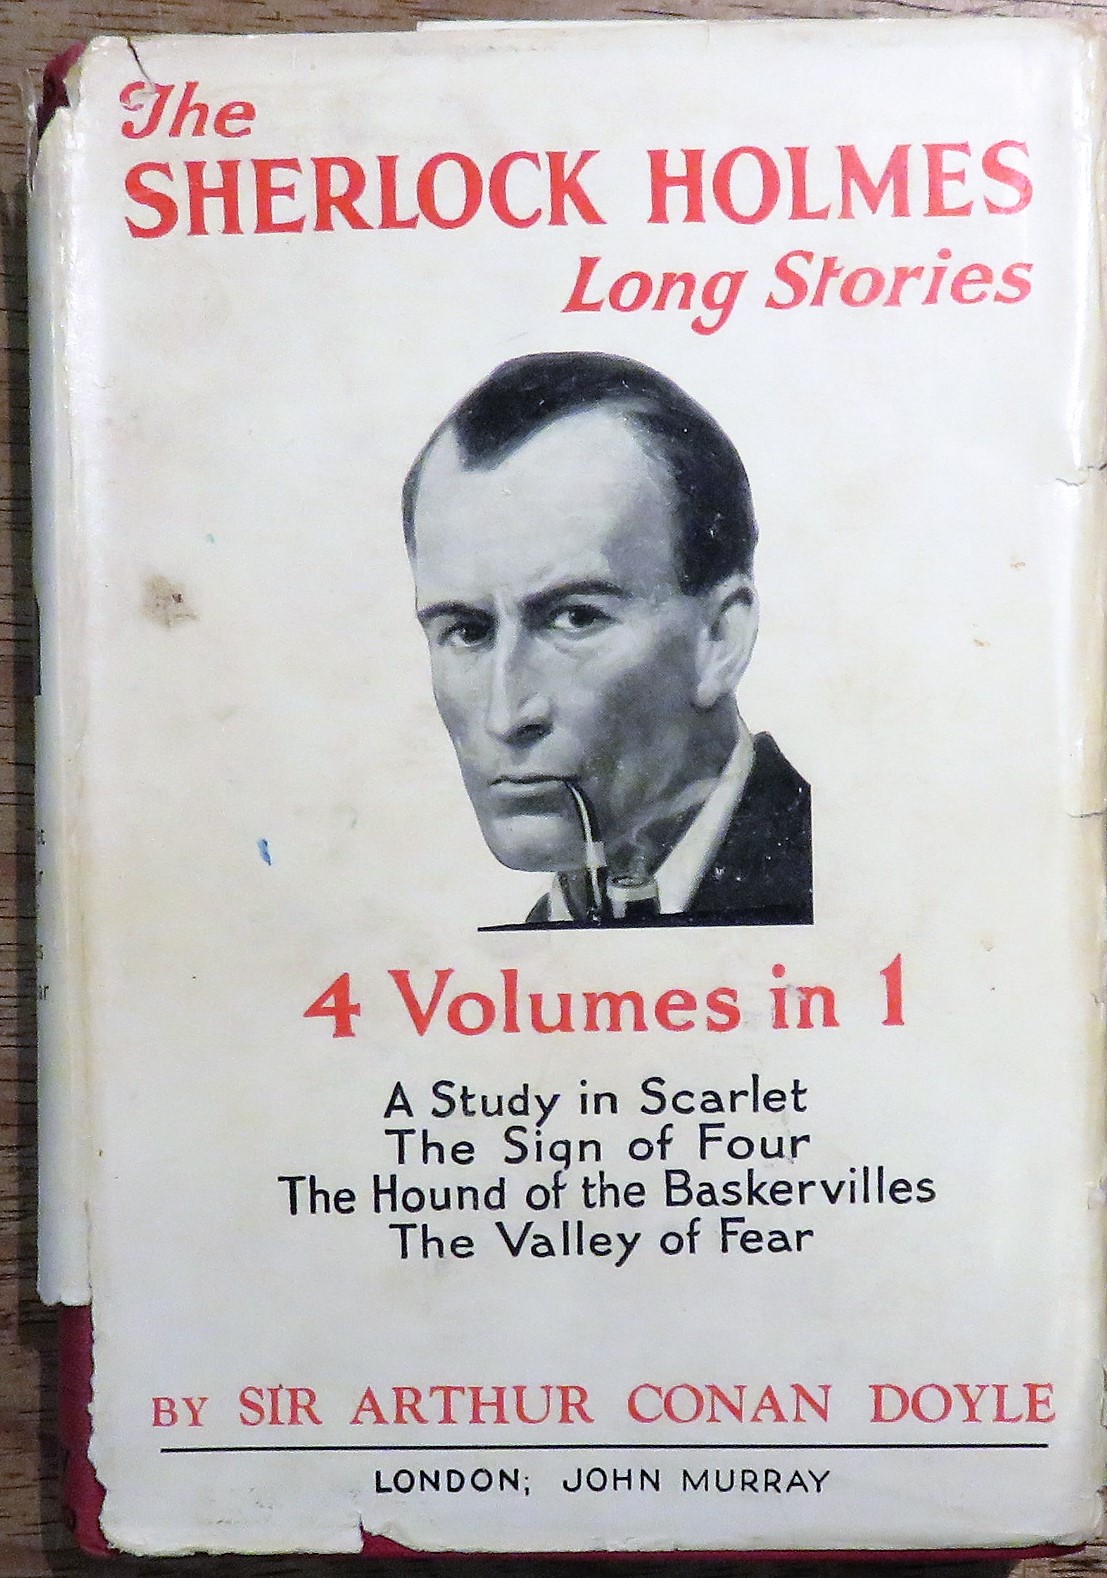 Sherlock Holmes The Complete Long Stories: A Study in Scarlet, The Sign of Four, The Hound of the Baskervilles, The Valley of Fear